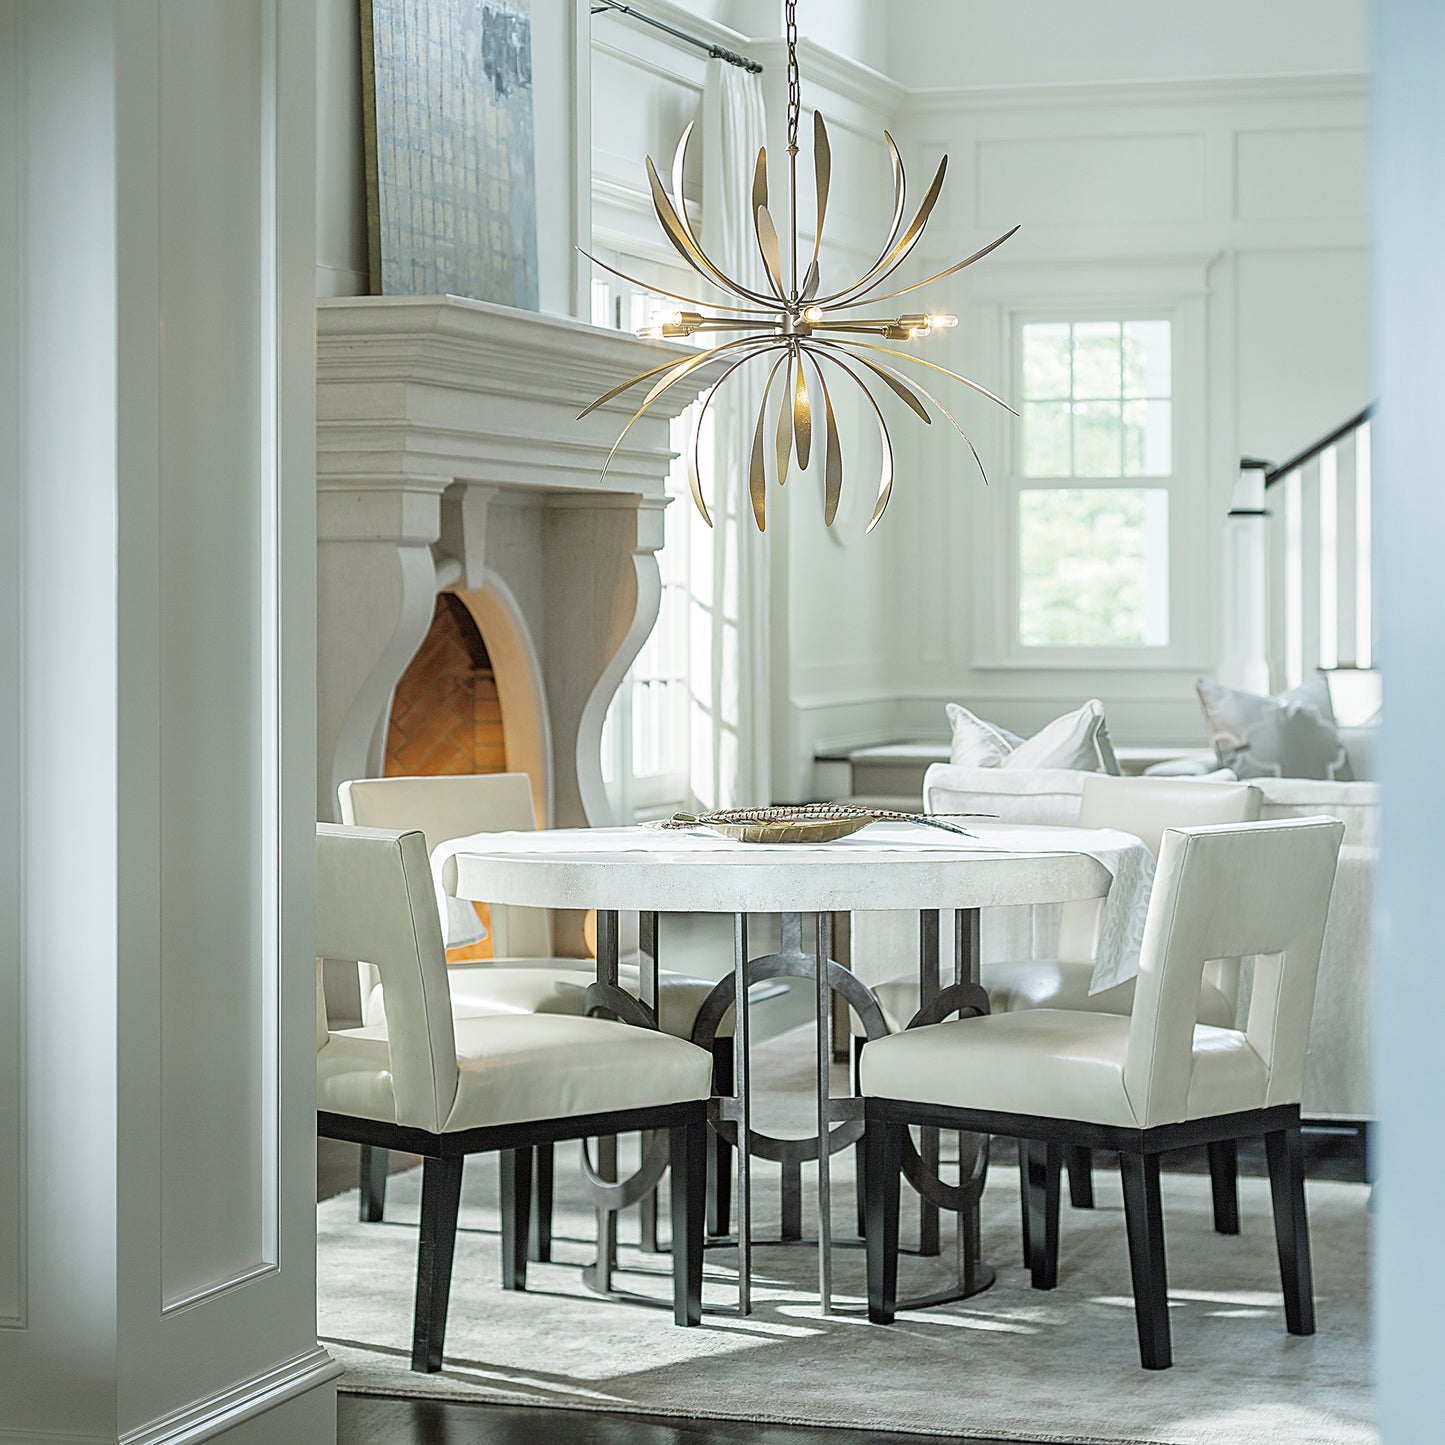 A dining room with a white table and chairs illuminated by a handcrafted Hubbardton Forge Dahlia Chandelier.